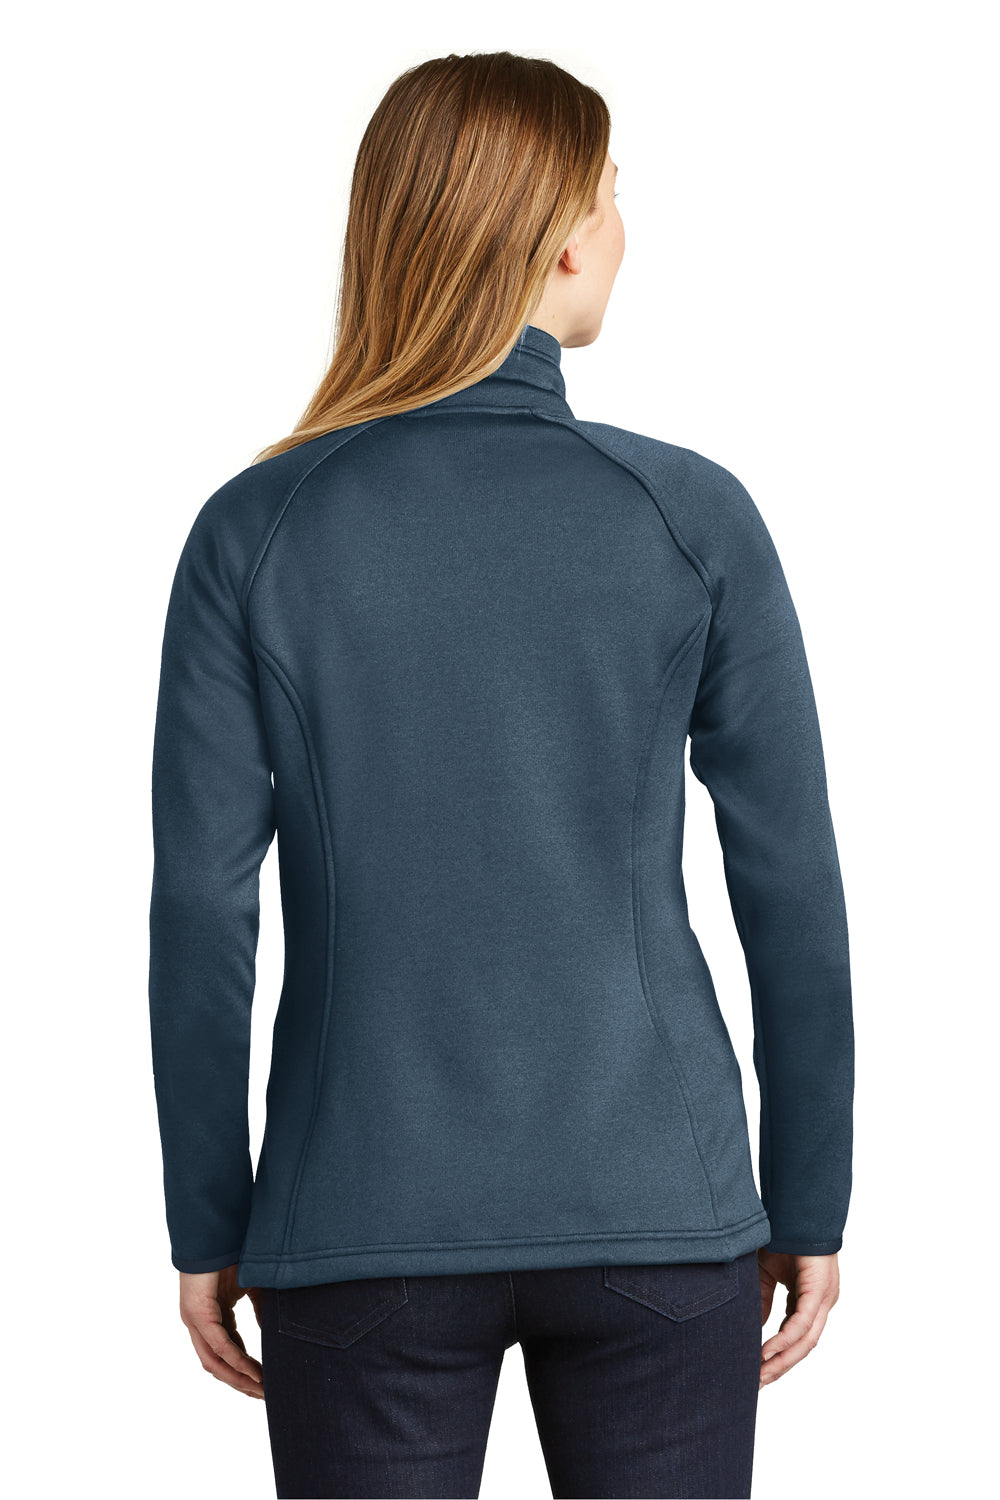 The North Face NF0A3LHA Womens Canyon Flats Full Zip Fleece Jacket Heather Navy Blue Back